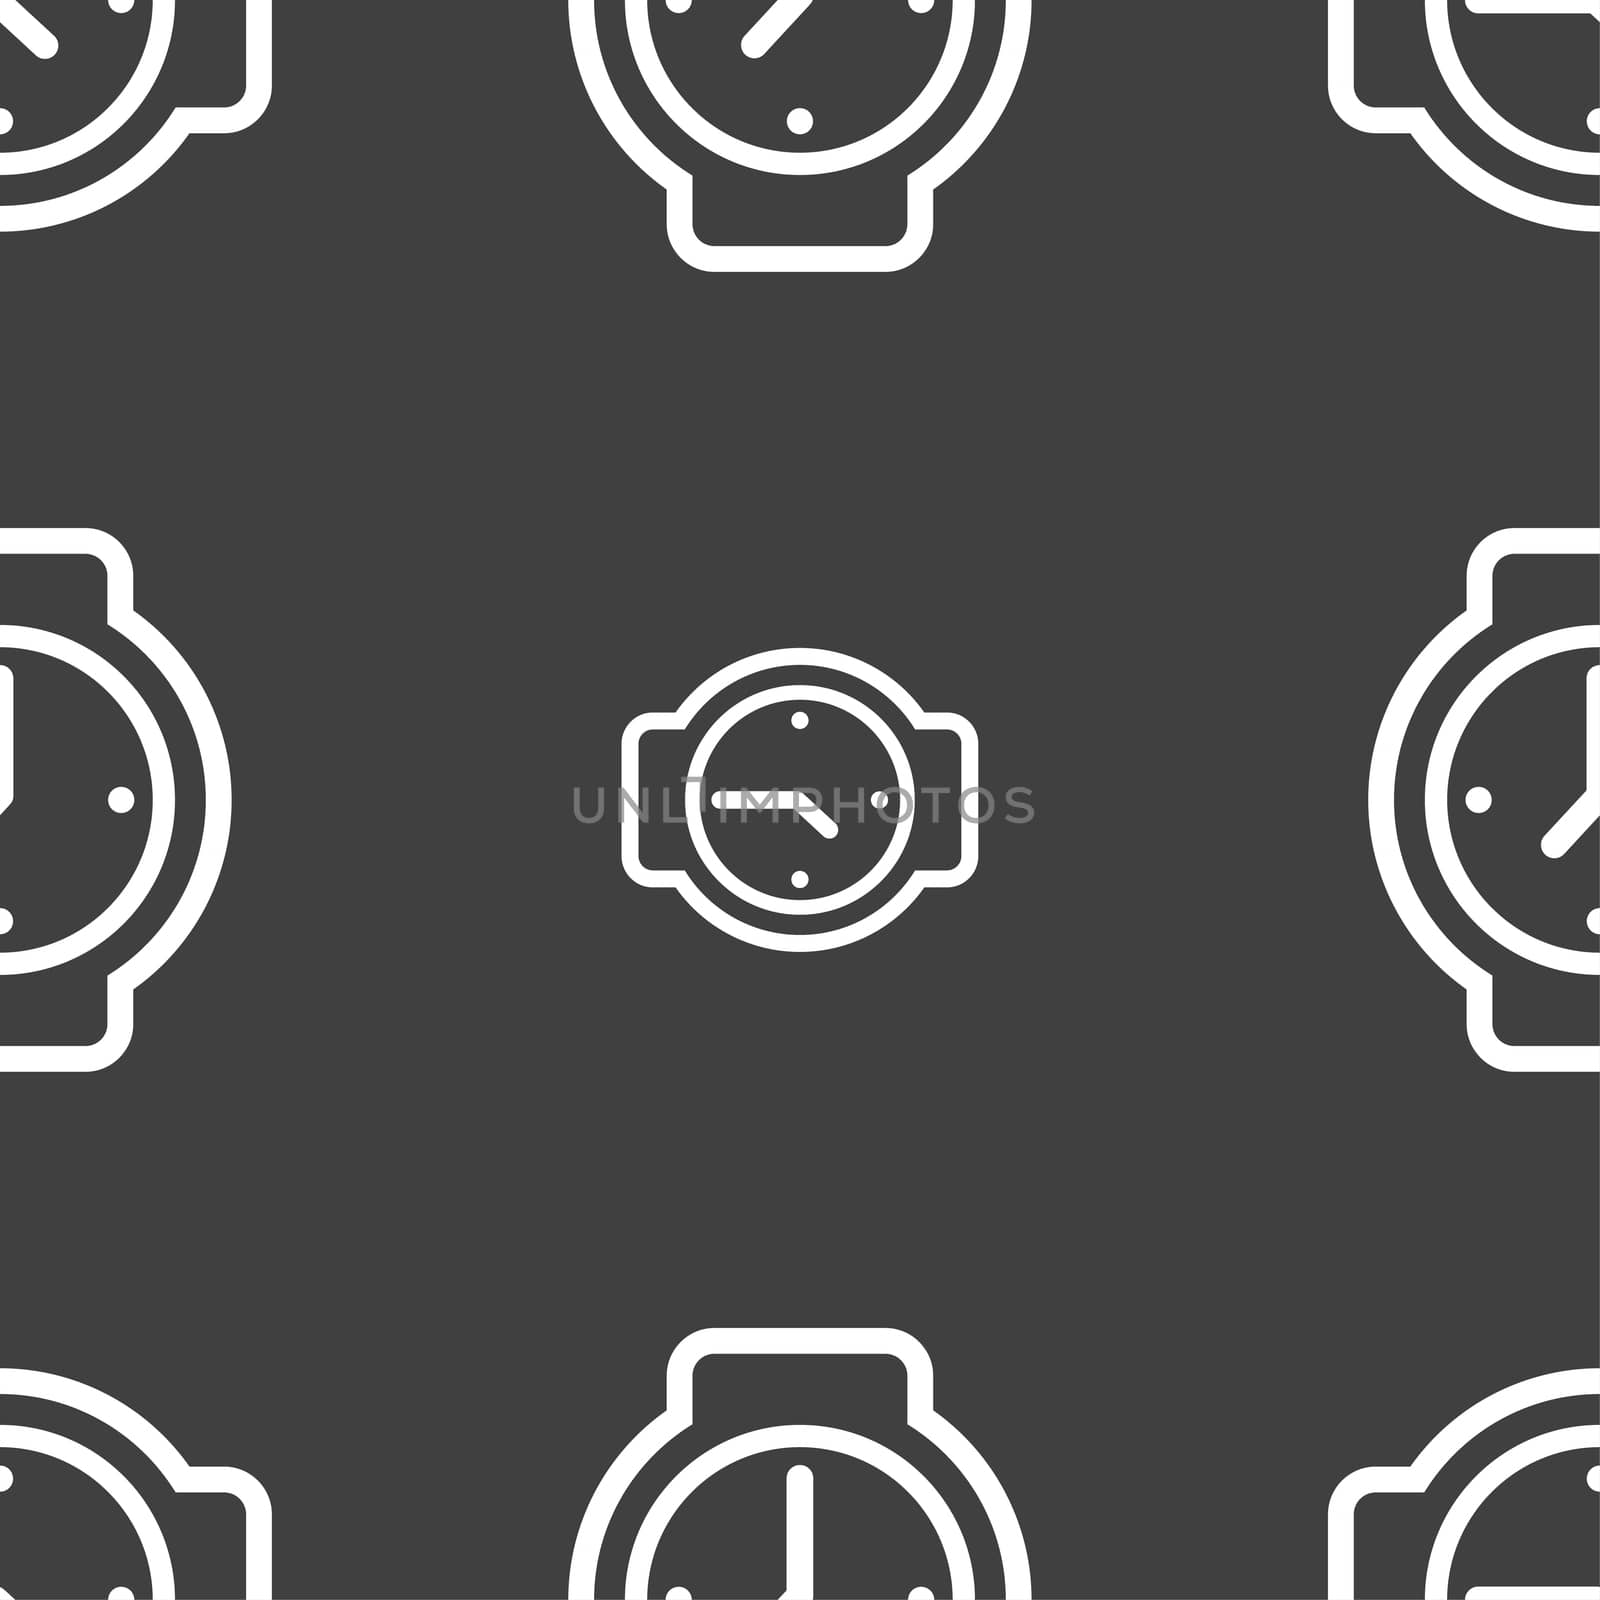 watches icon sign. Seamless pattern on a gray background. illustration